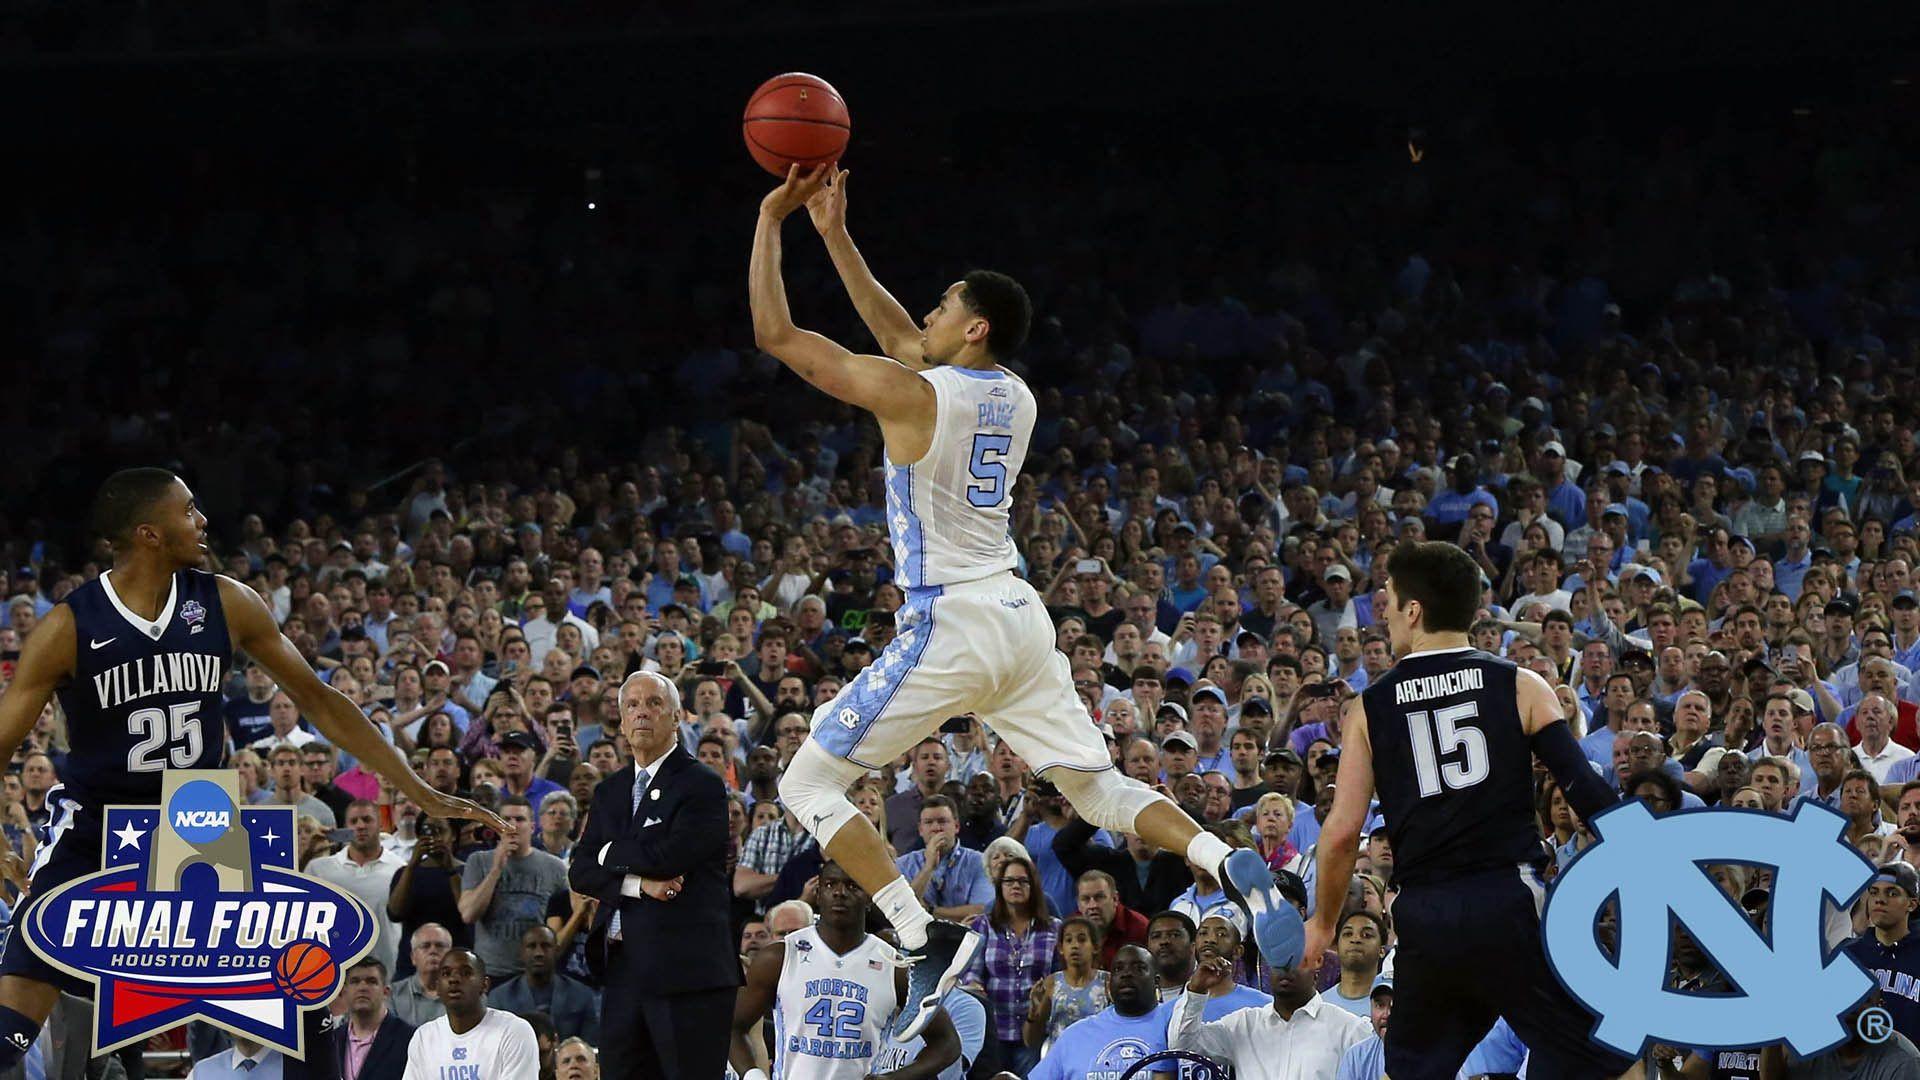 Marcus Paige: Final Postgame Interview As A Tar Heel